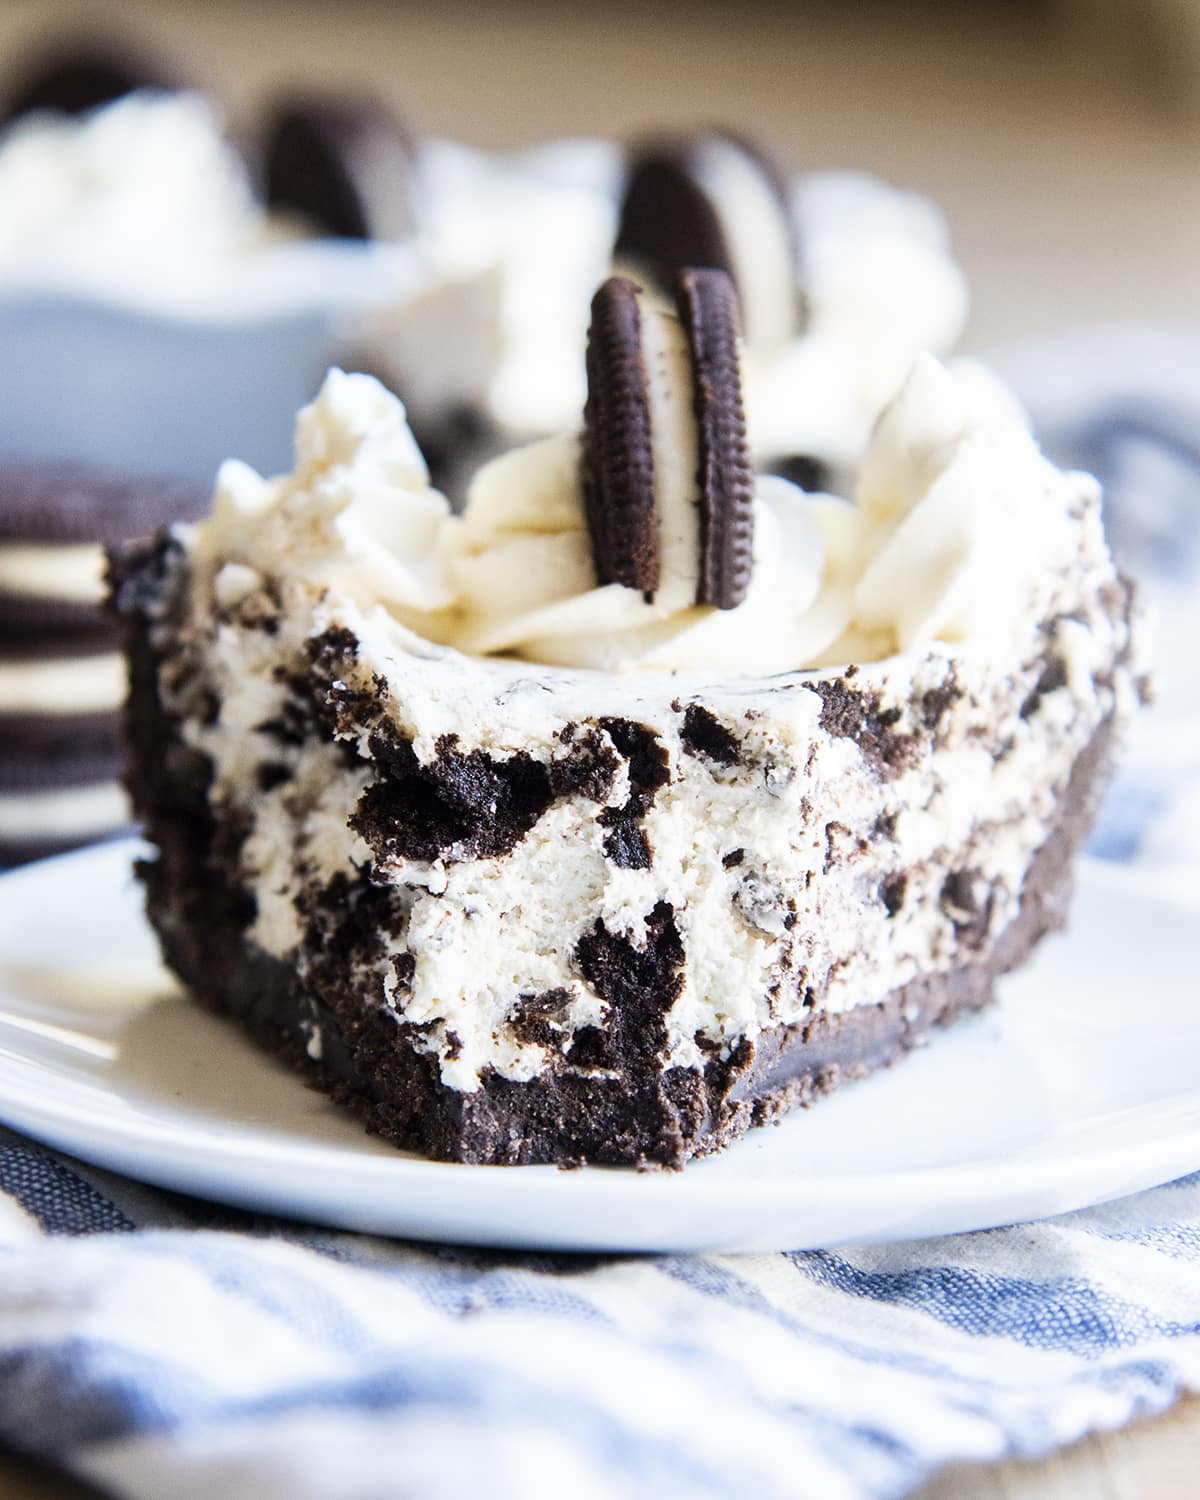 A cookies and cream pie with an Oreo crust, with a bite taken out of the front.